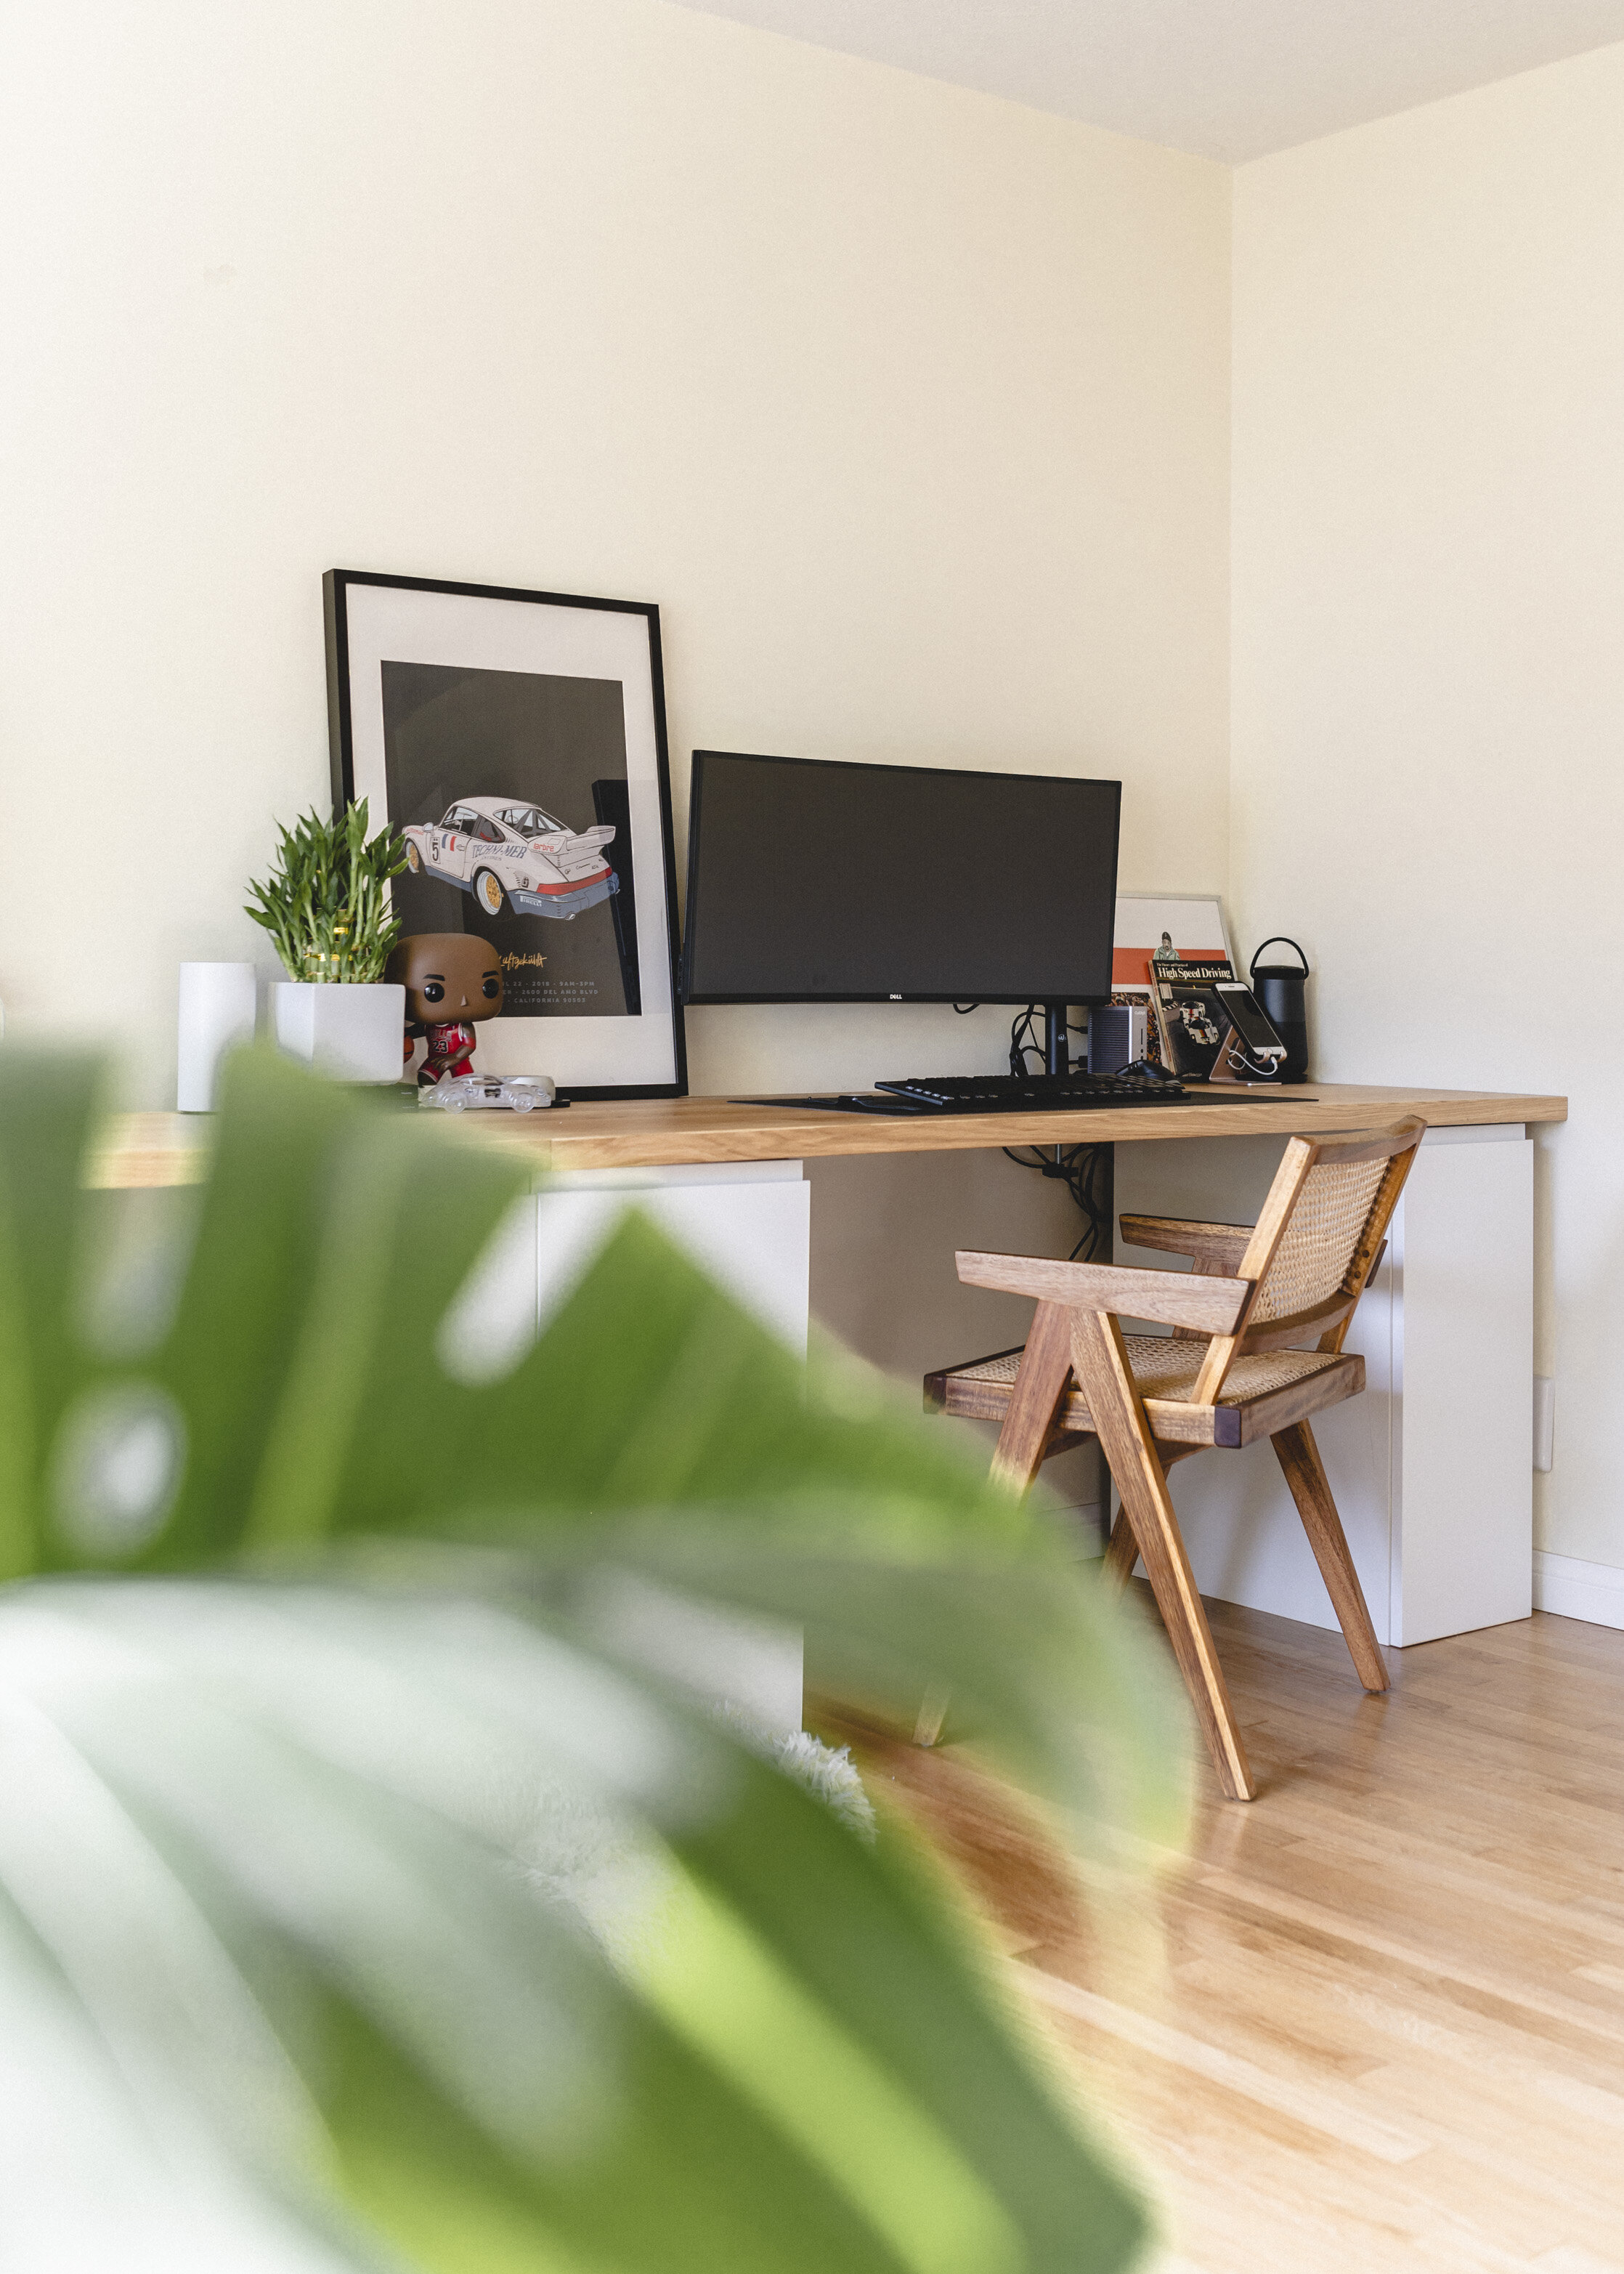 Our Ikea Desk Hack - A DIY Desk for Two — By Lisa Linh